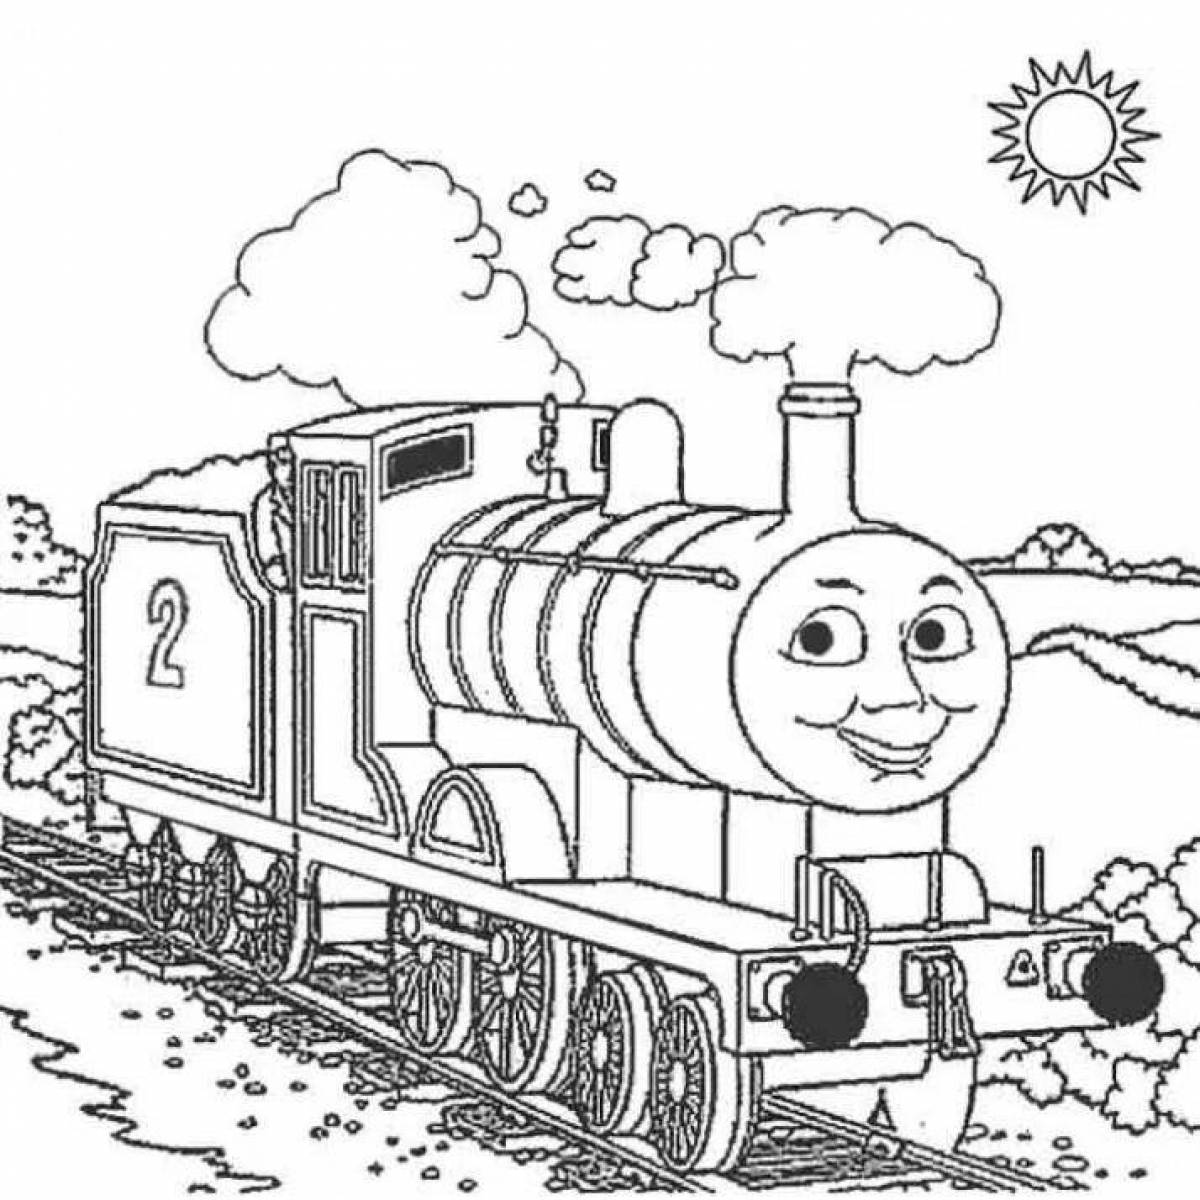 Charlie the Little Engine coloring page